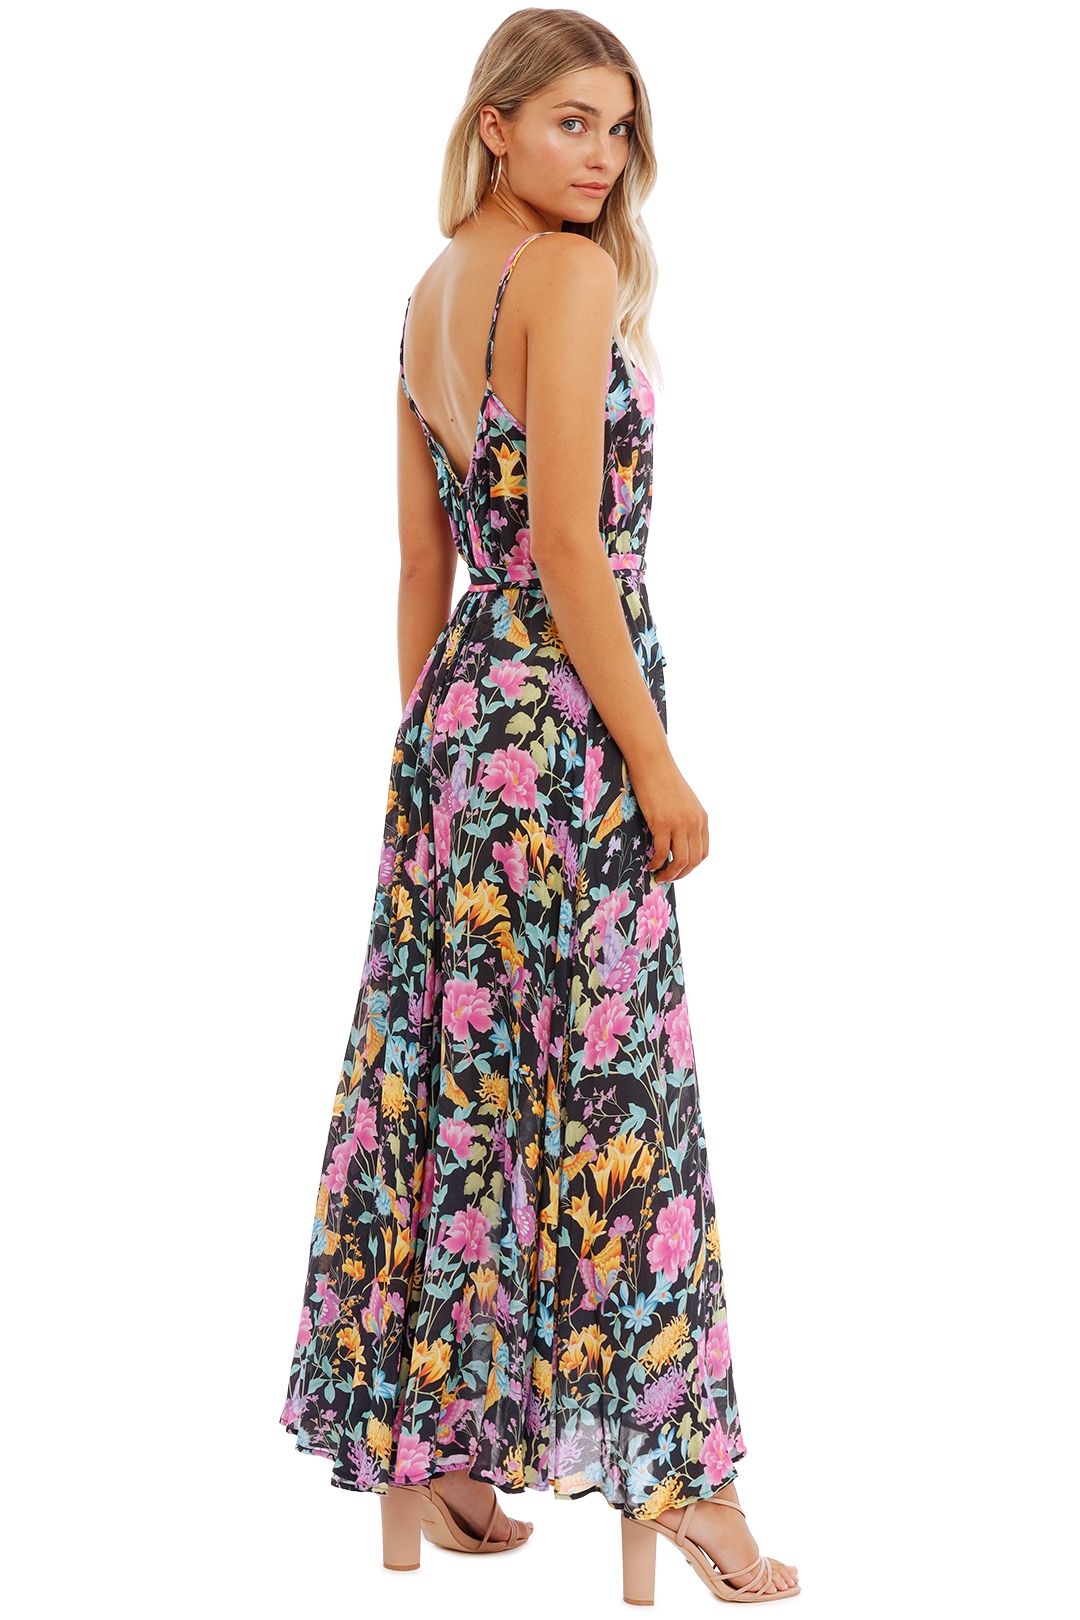 Spell Butterfly Strappy Maxi Dress Firefly floral